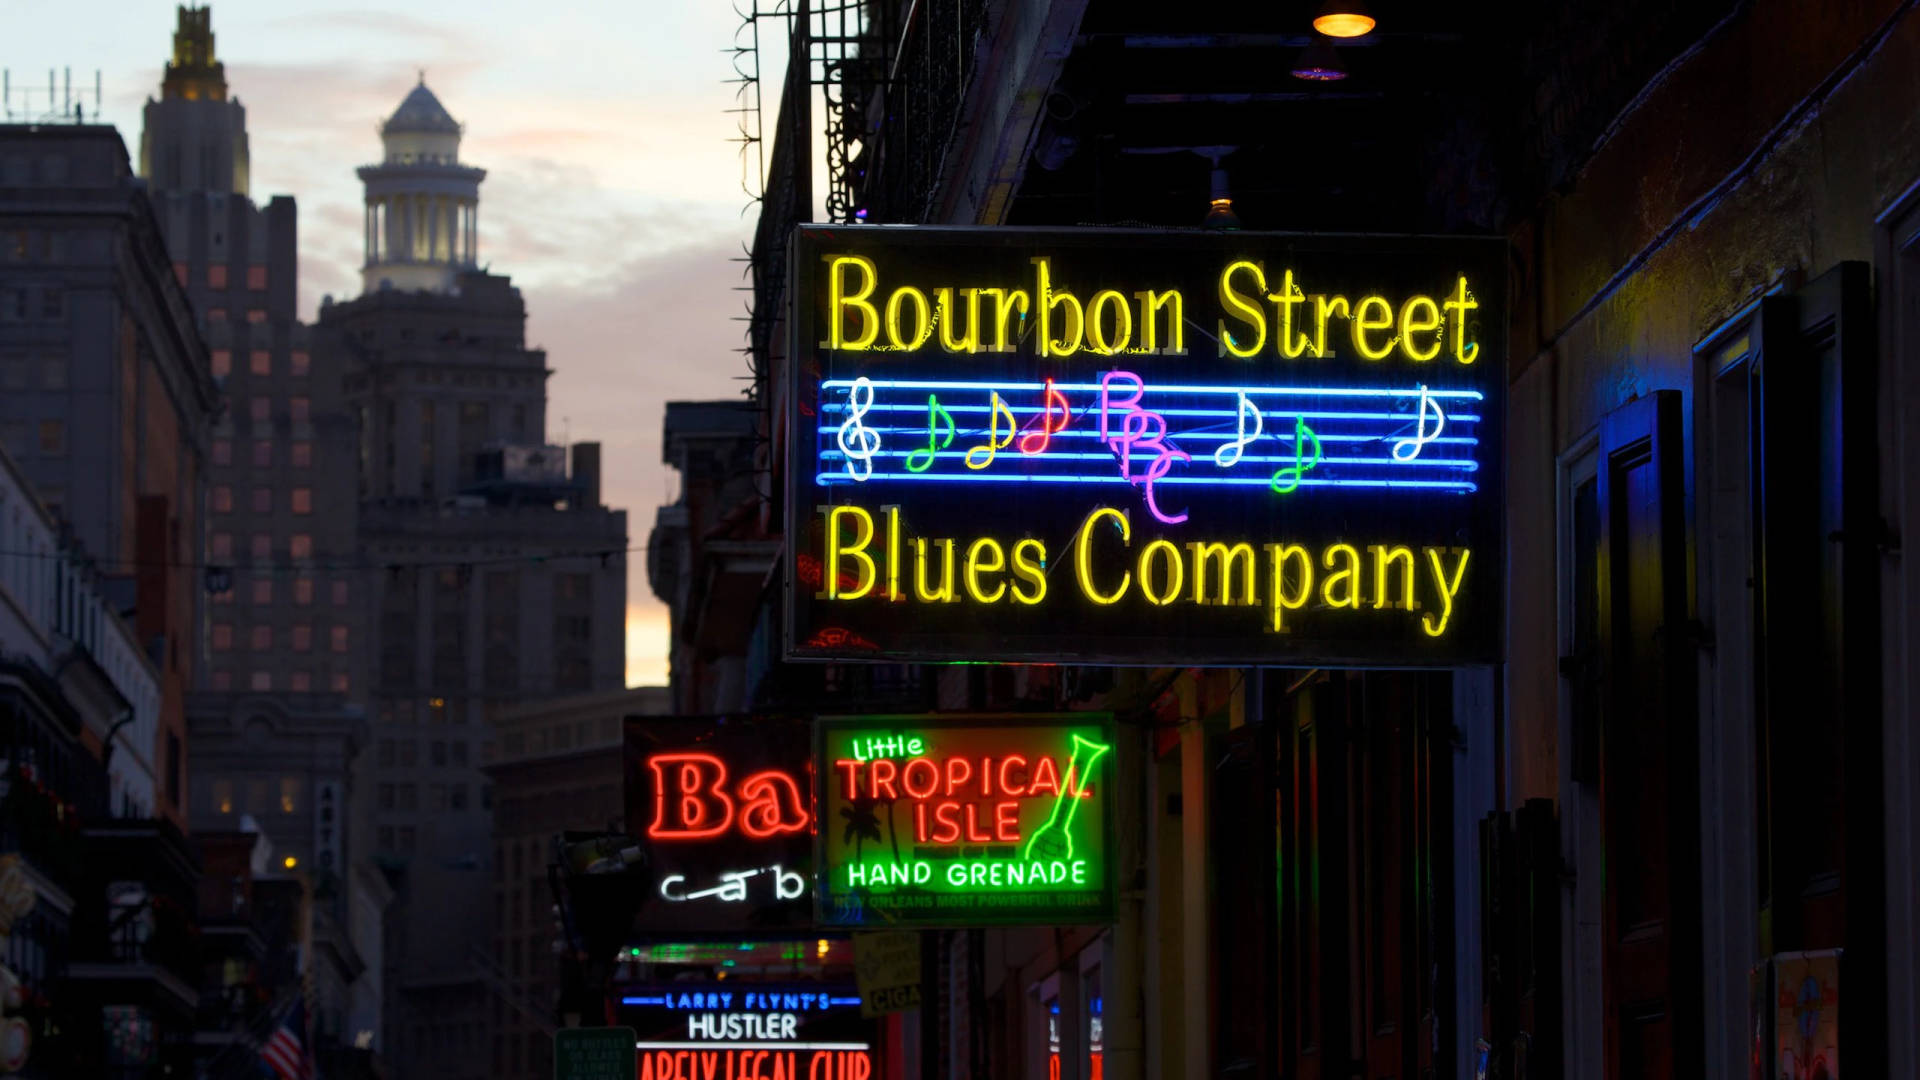 New Orleans Blues Company Neon Sign Wallpaper